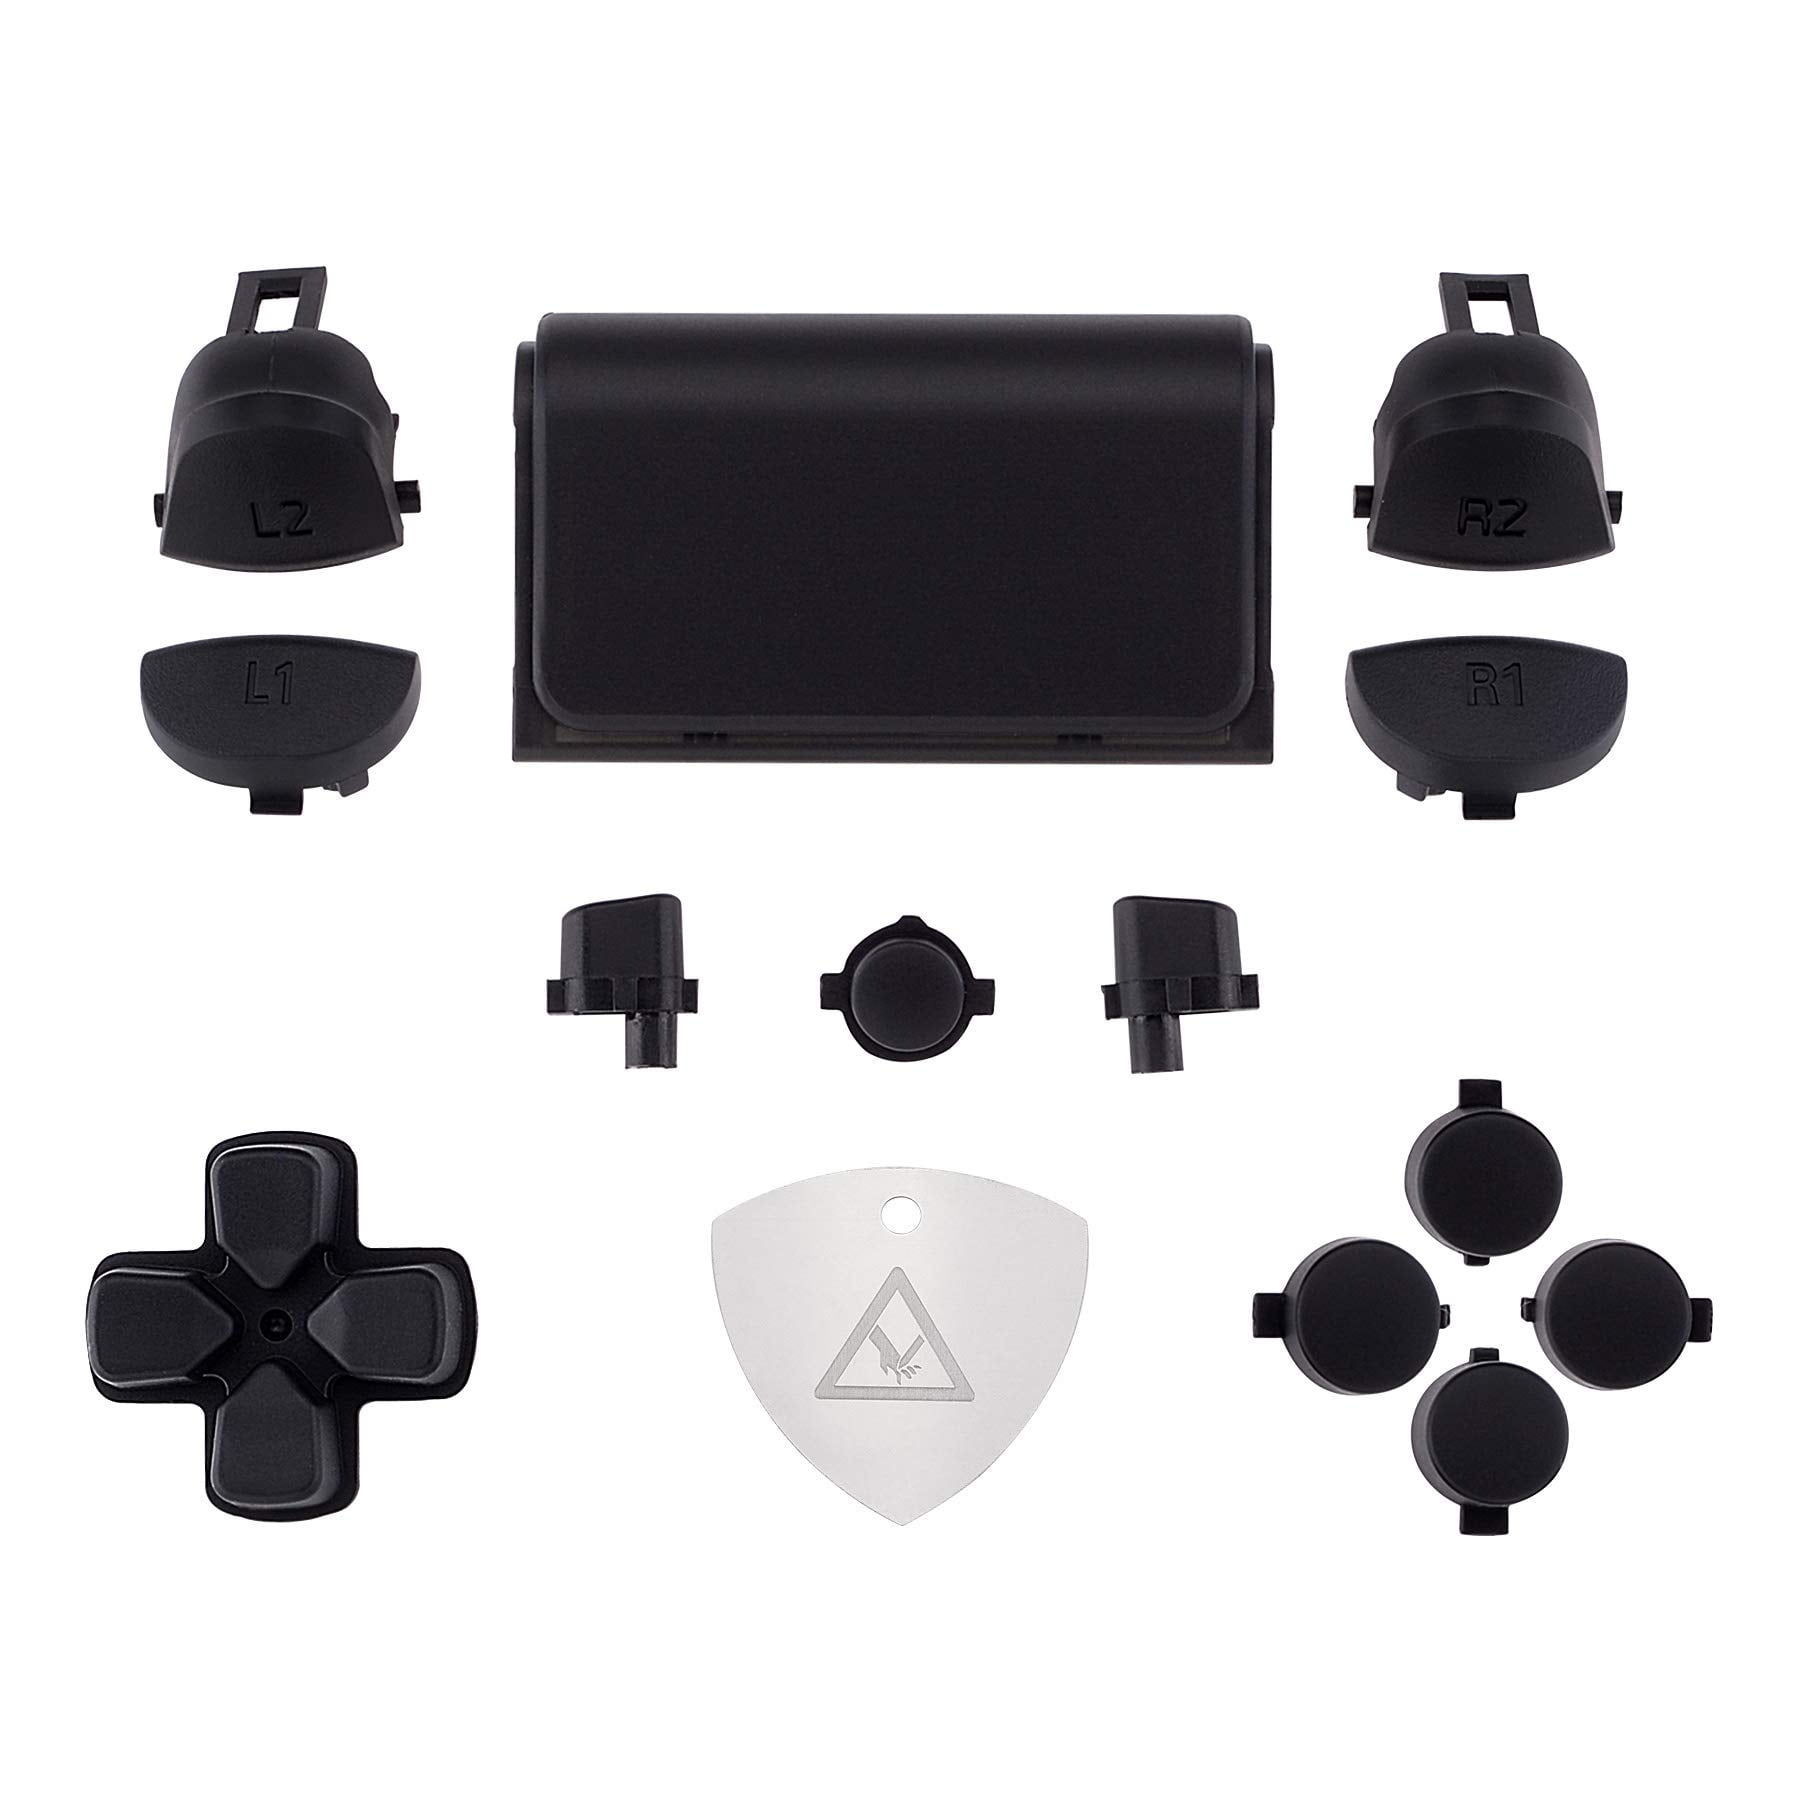 Slim Buttons R1 for Pro L1 ps4 Action CUH-ZCT2 Home Orange Kits Buttons Touchpad Controller, Replacement R2 for Share Repair Options Controller Full ps4 L2 eXtremeRate D-pad Set Triggers